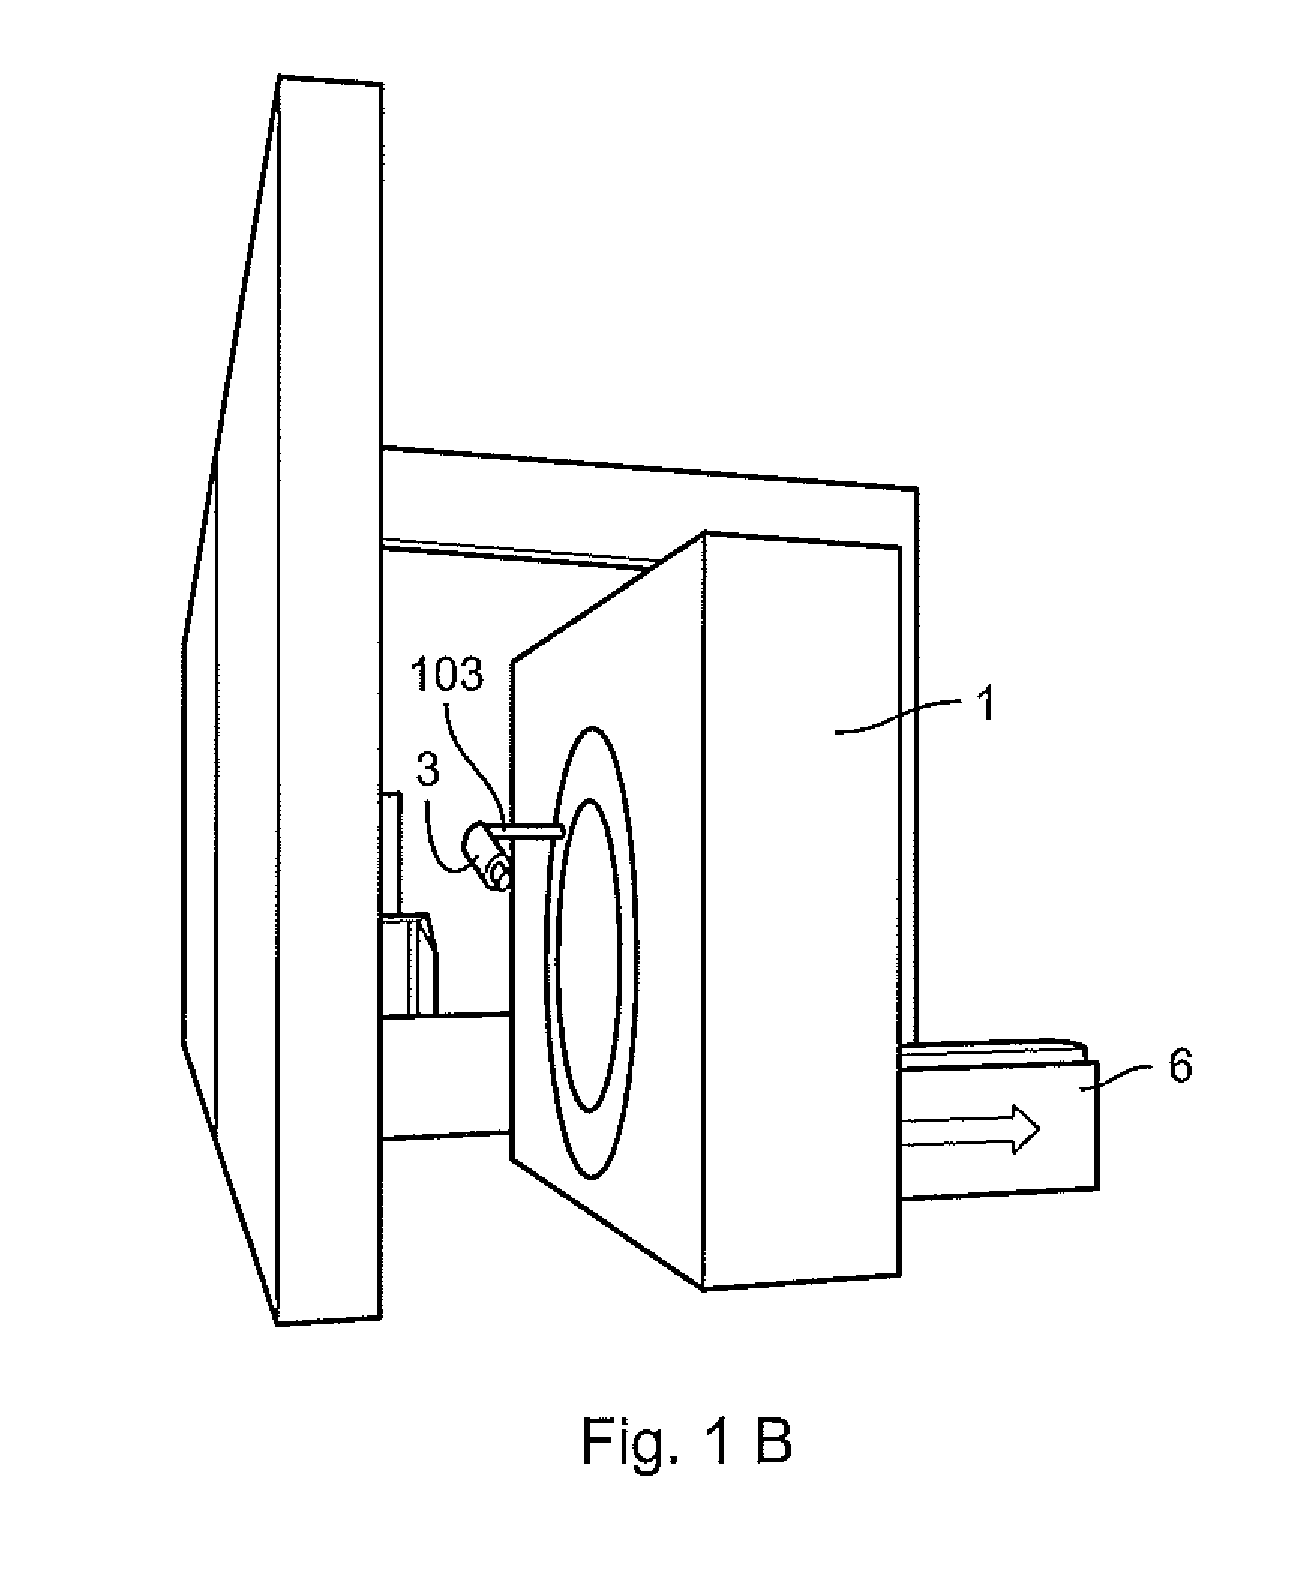 Apparatus and method to carry out image guided radiotherapy with kilo-voltage X-ray beams in the presence of a contrast agent